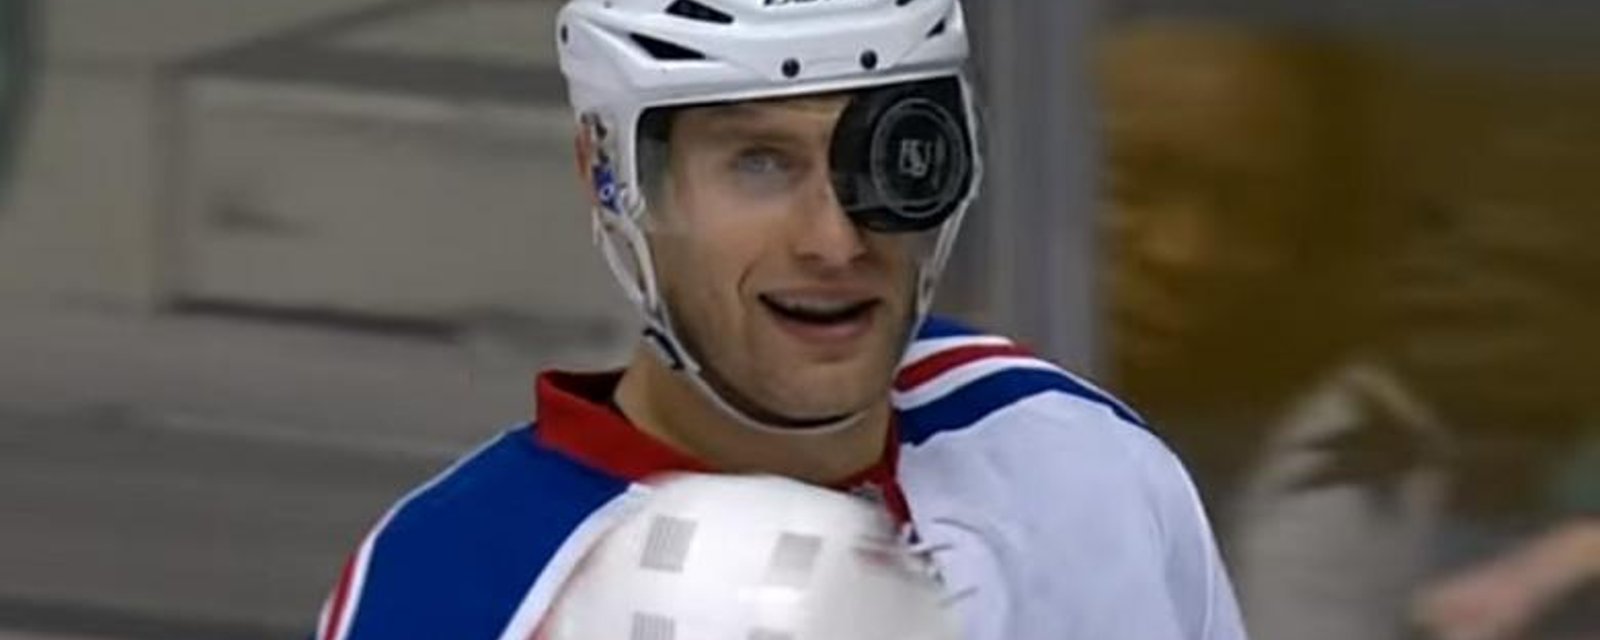 Dan Girardi gets a new and very interesting eye patch.